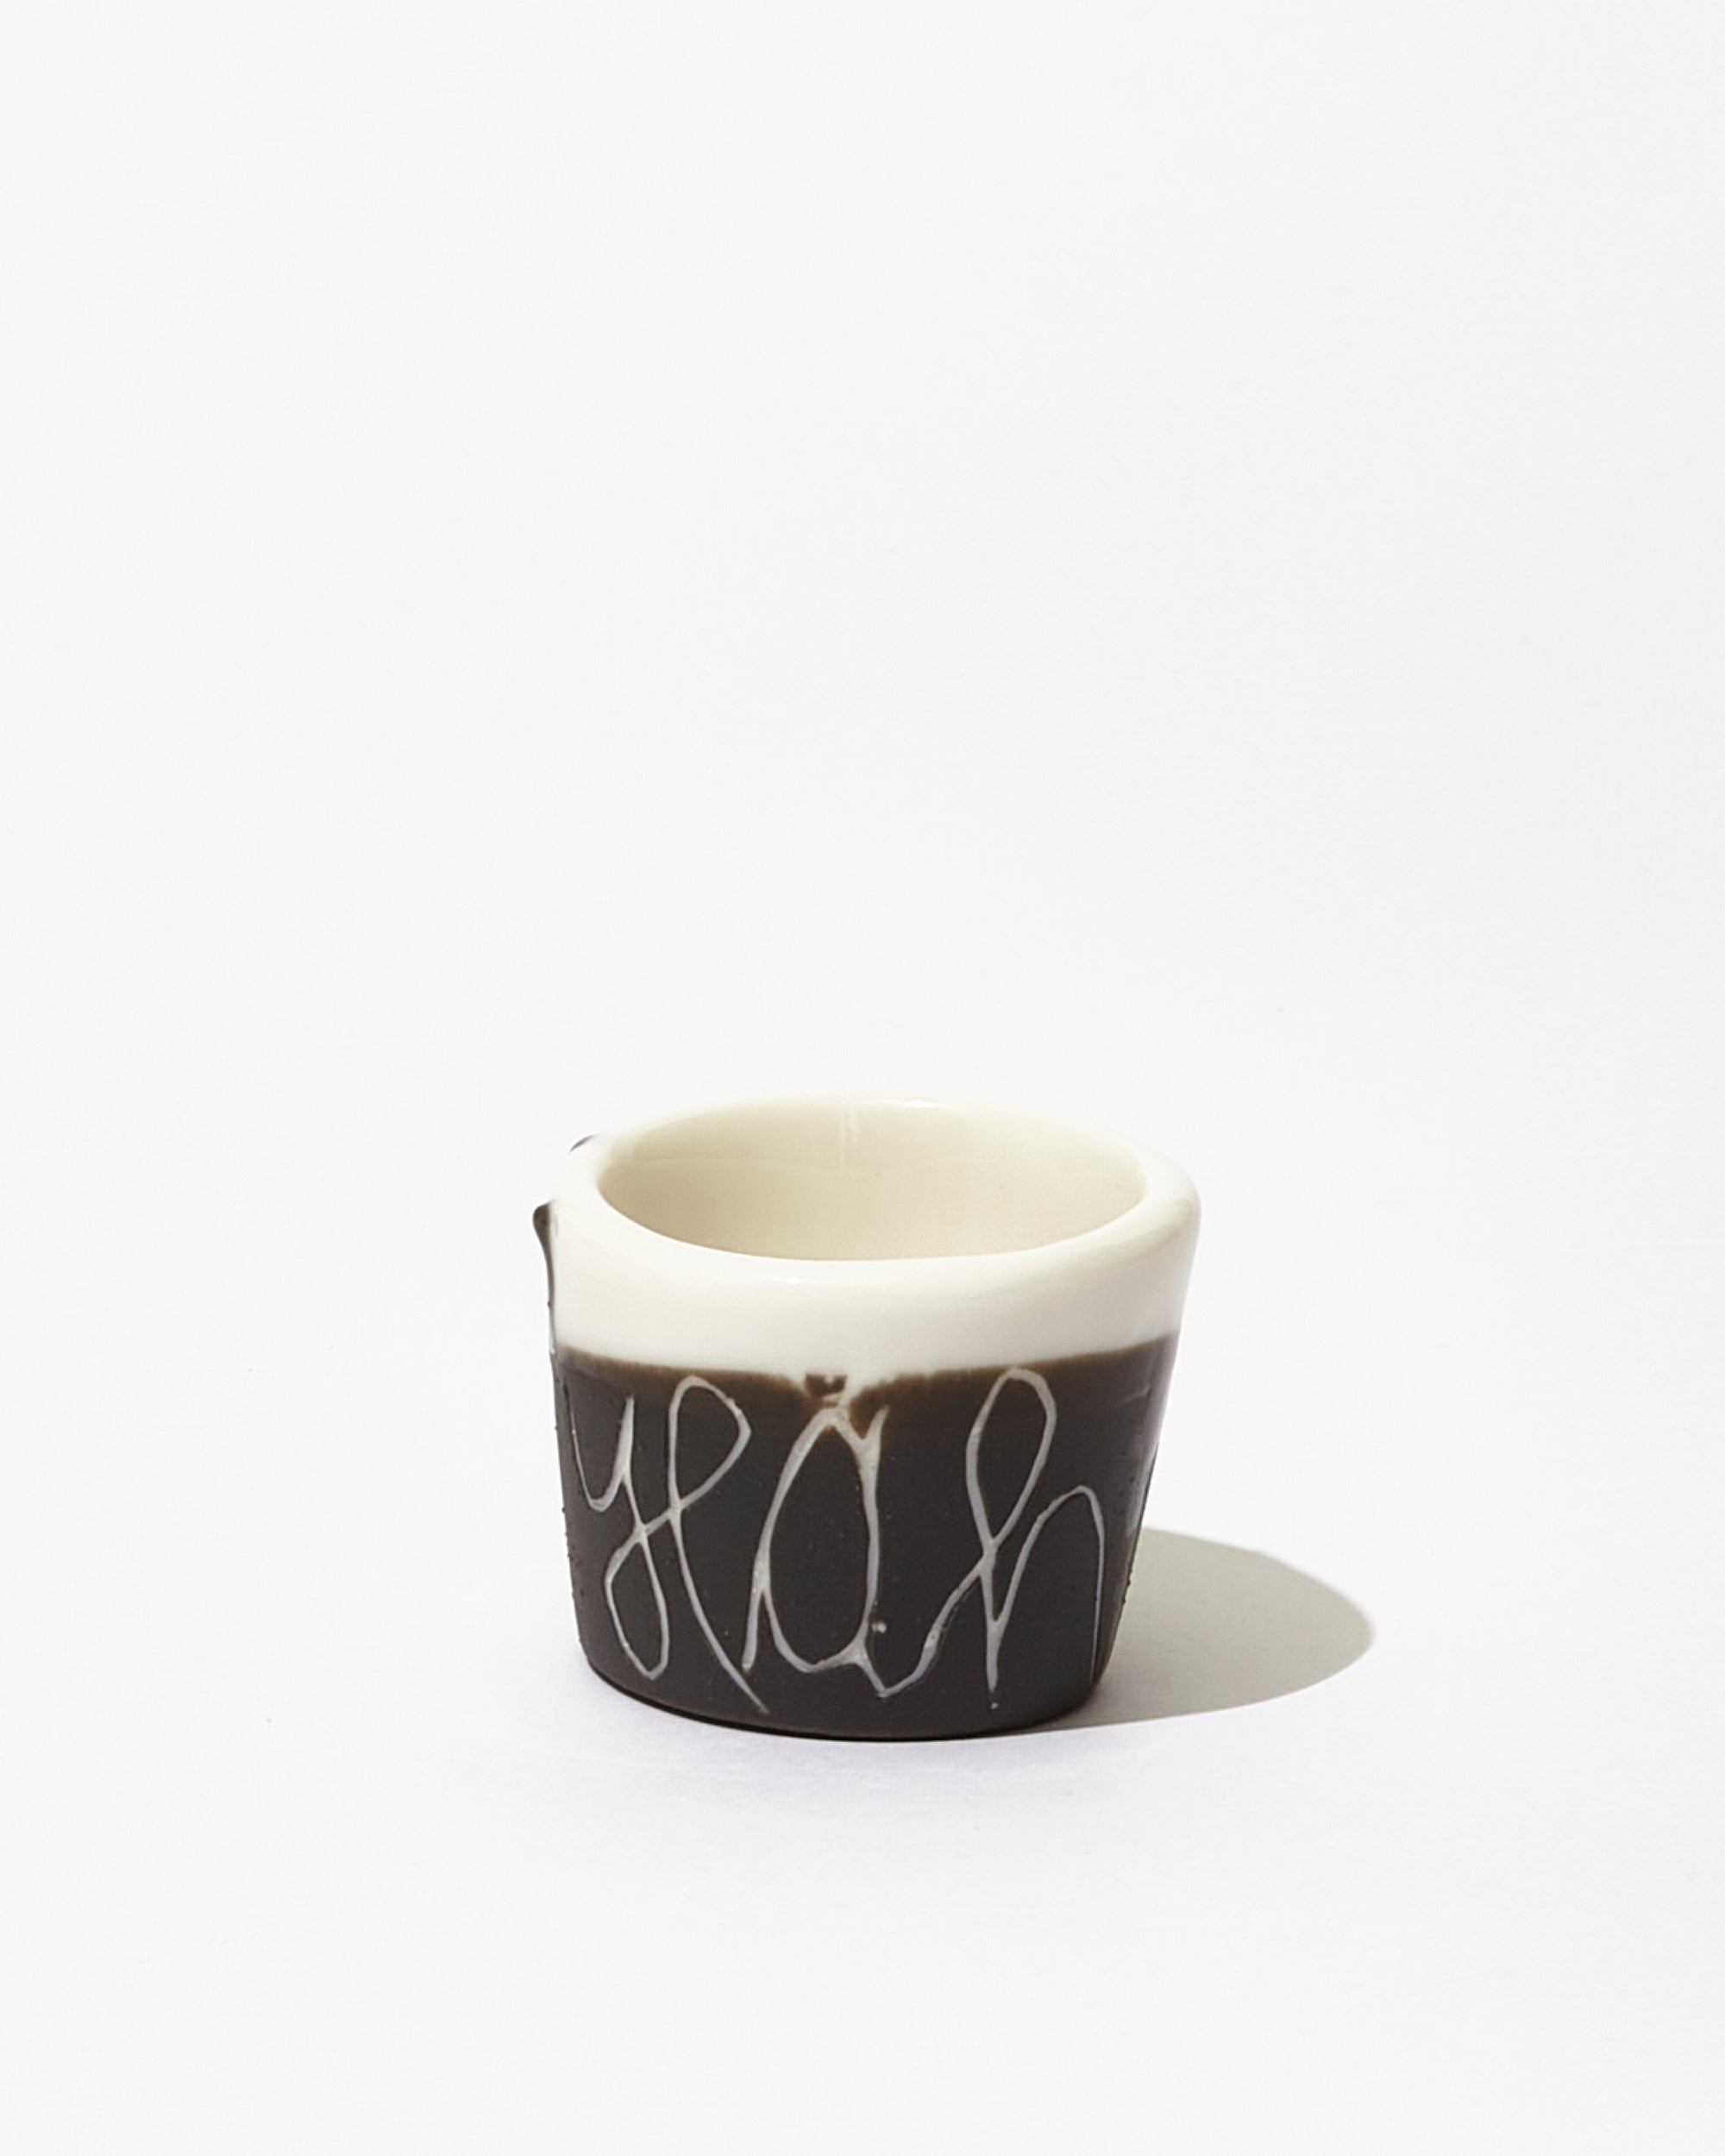 the small porcelain cup